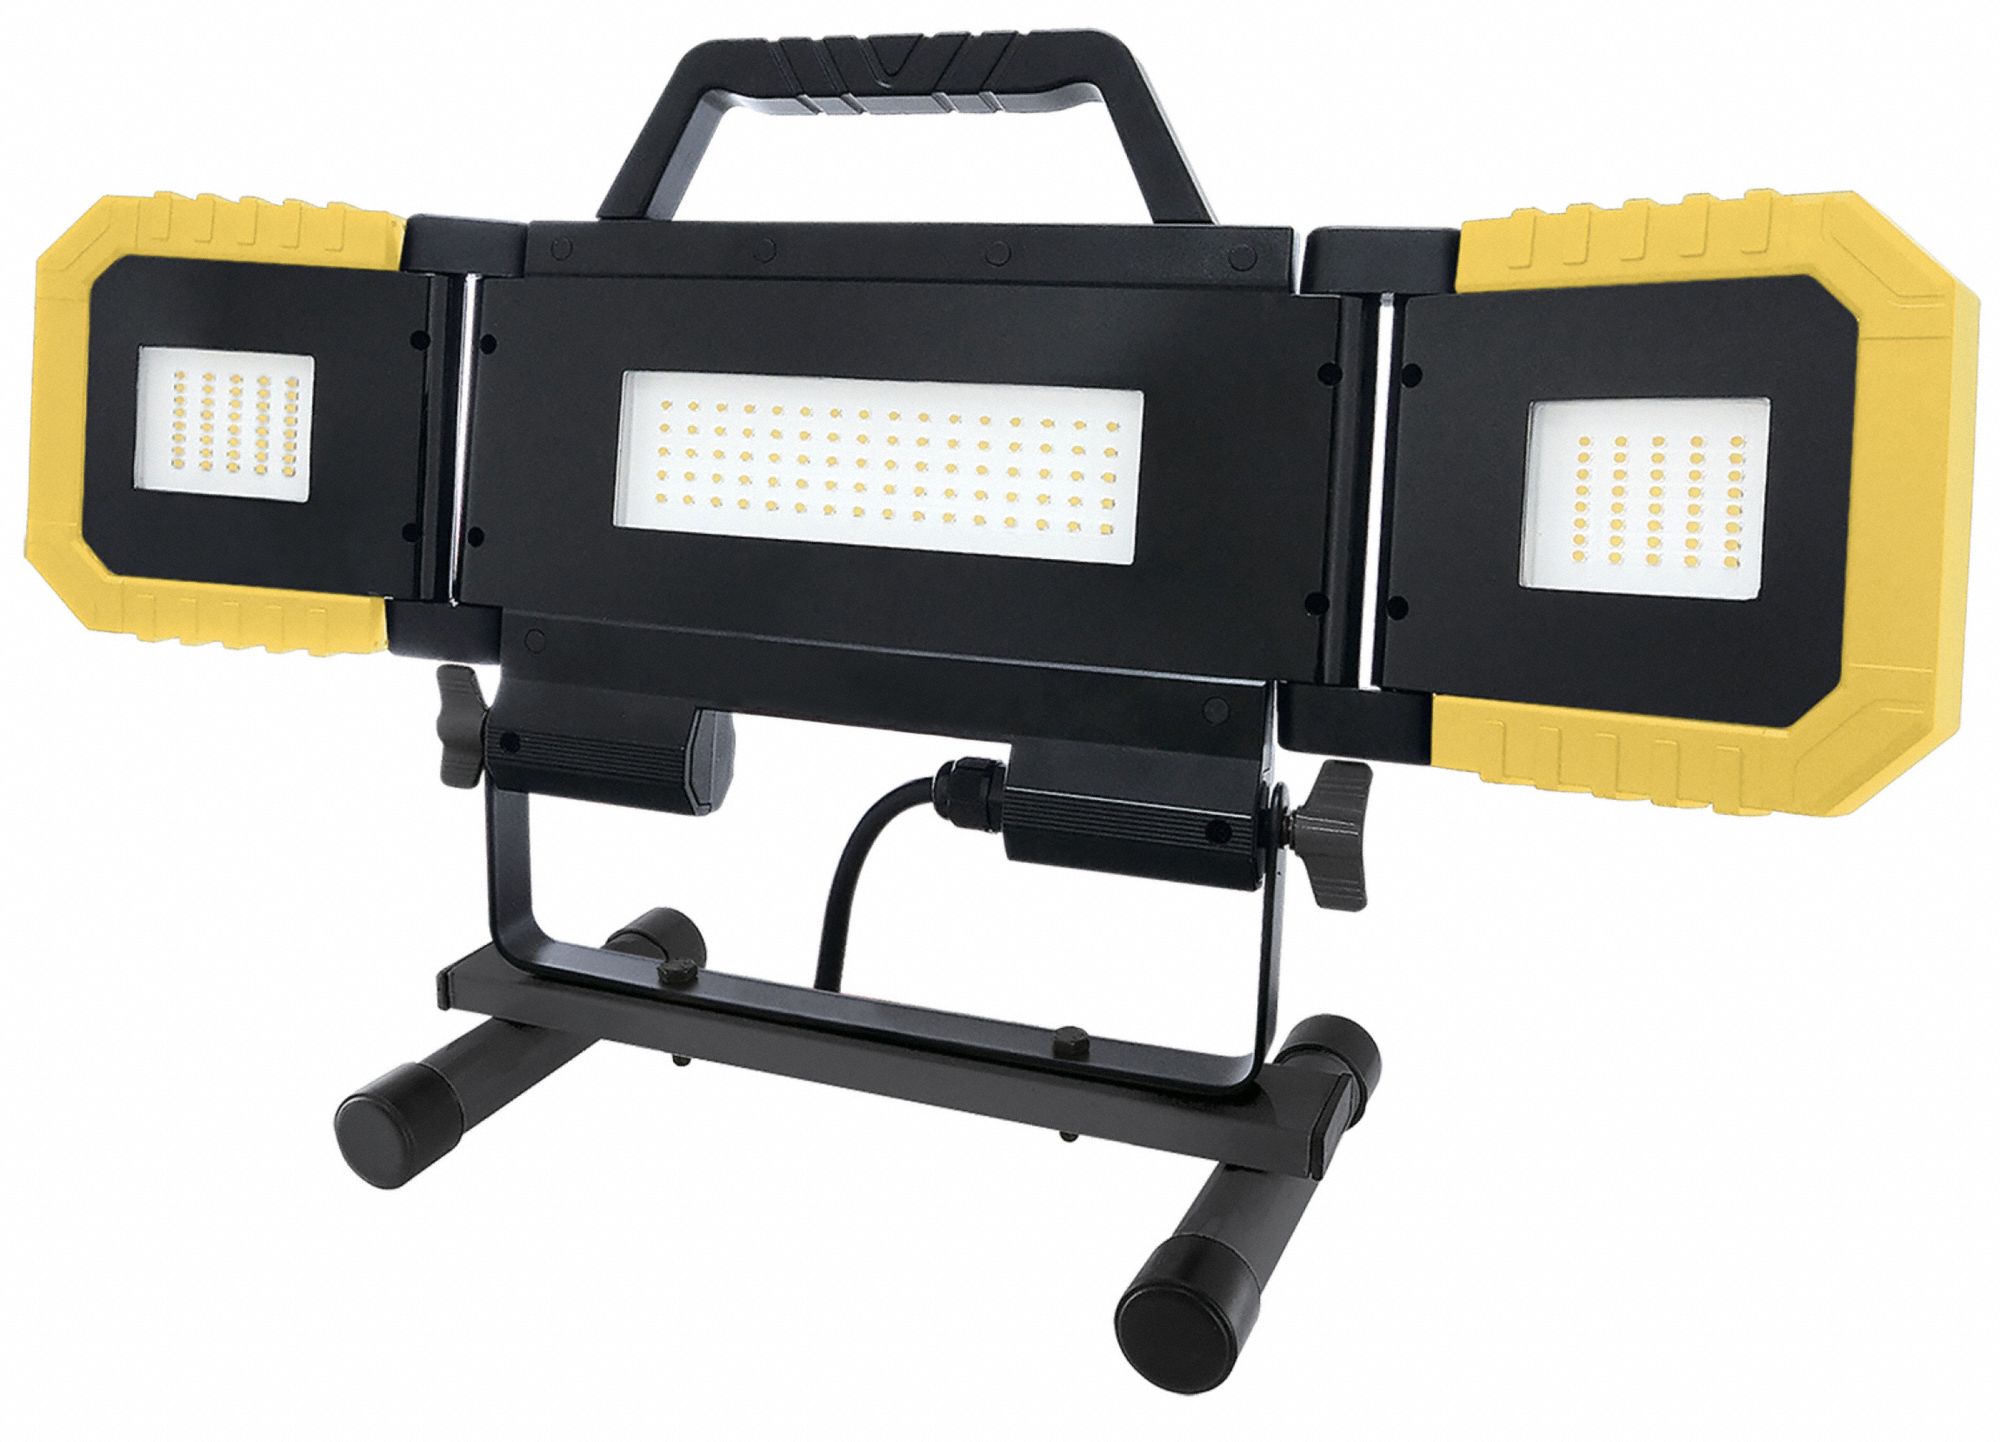 Portable Work Light, Floor Stand, Corded, 8000 Lm, 3 Lamp Heads